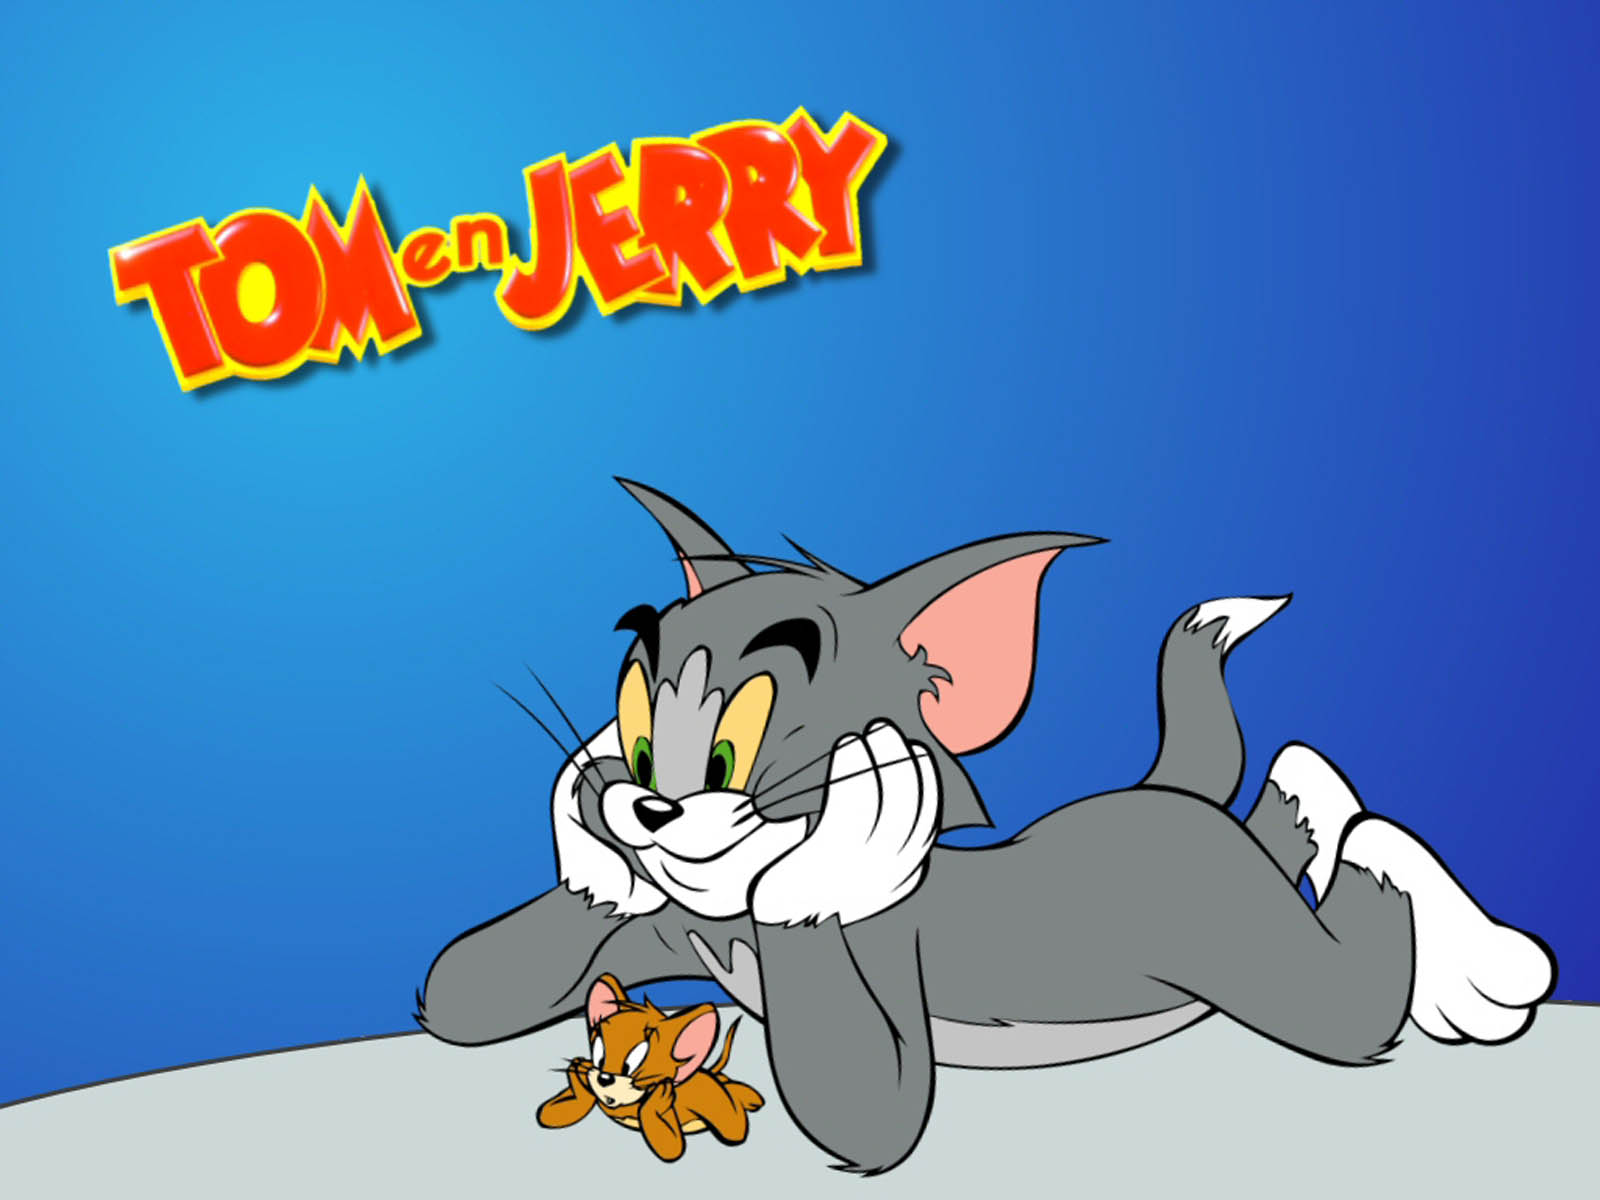 Tom and Jerry Wallpapers A9